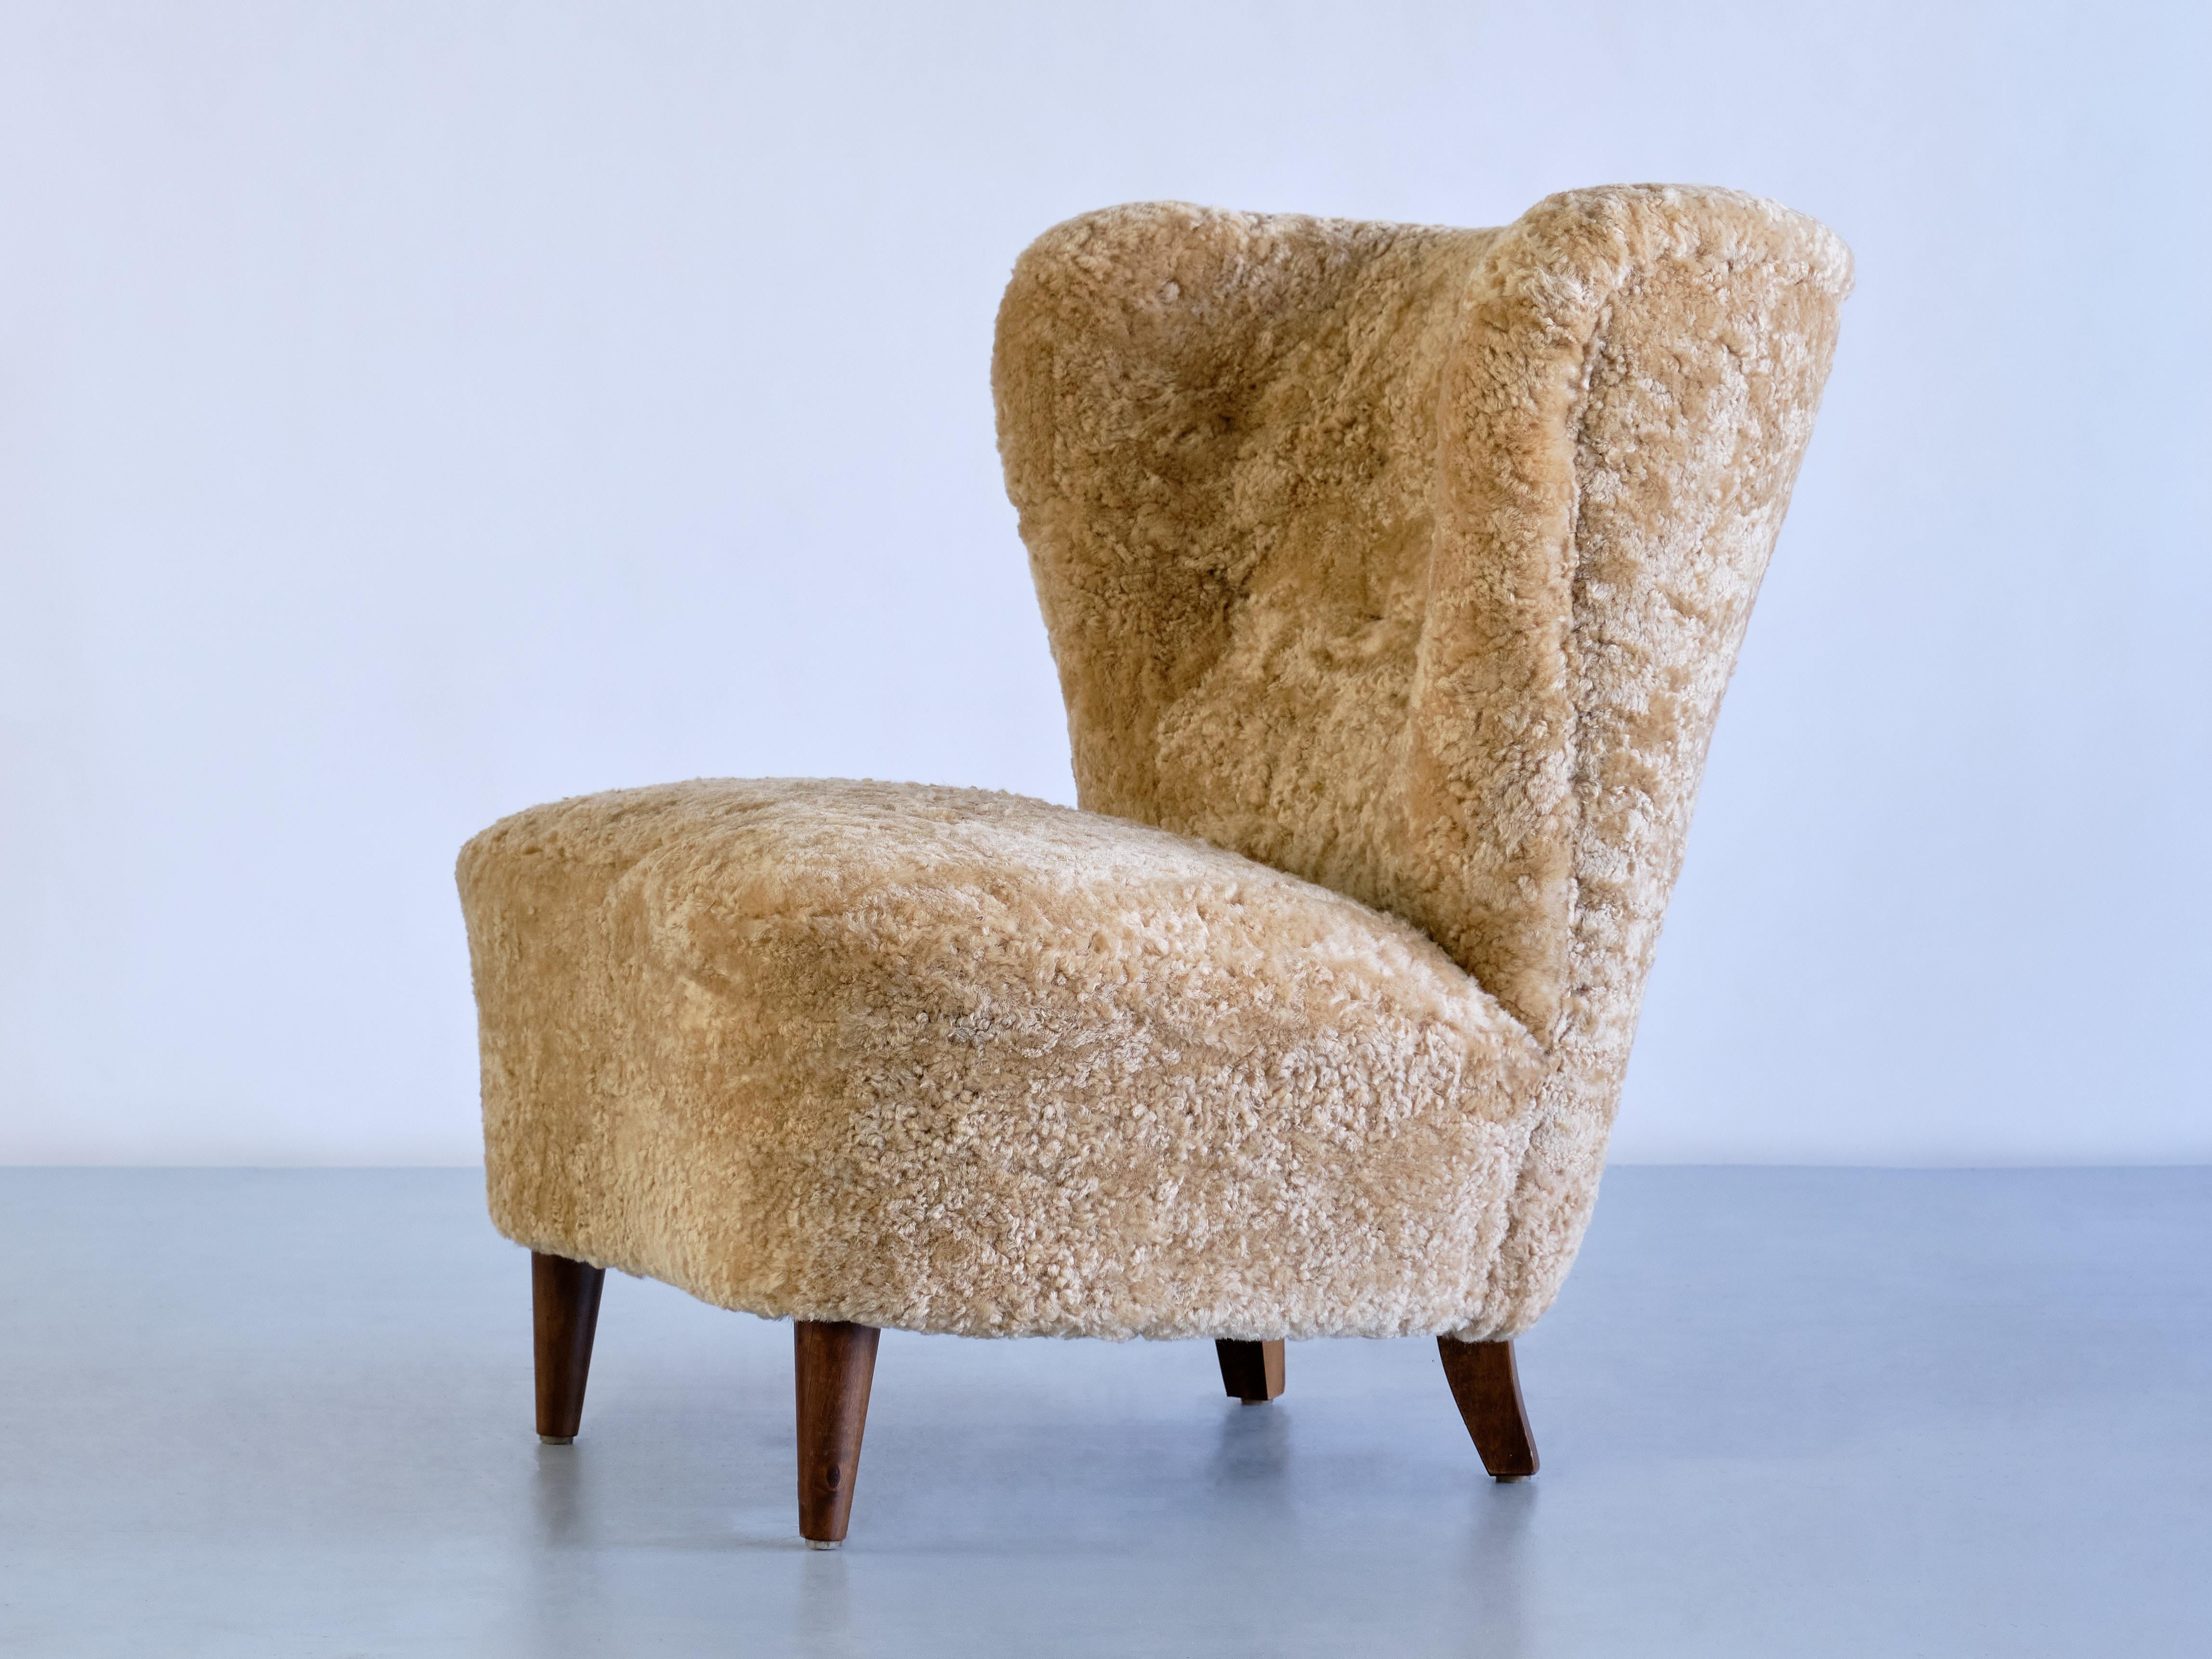 Pair of Johannes Brynte Lounge Chairs in Sheepskin and Ash Wood, Sweden, 1940s For Sale 7